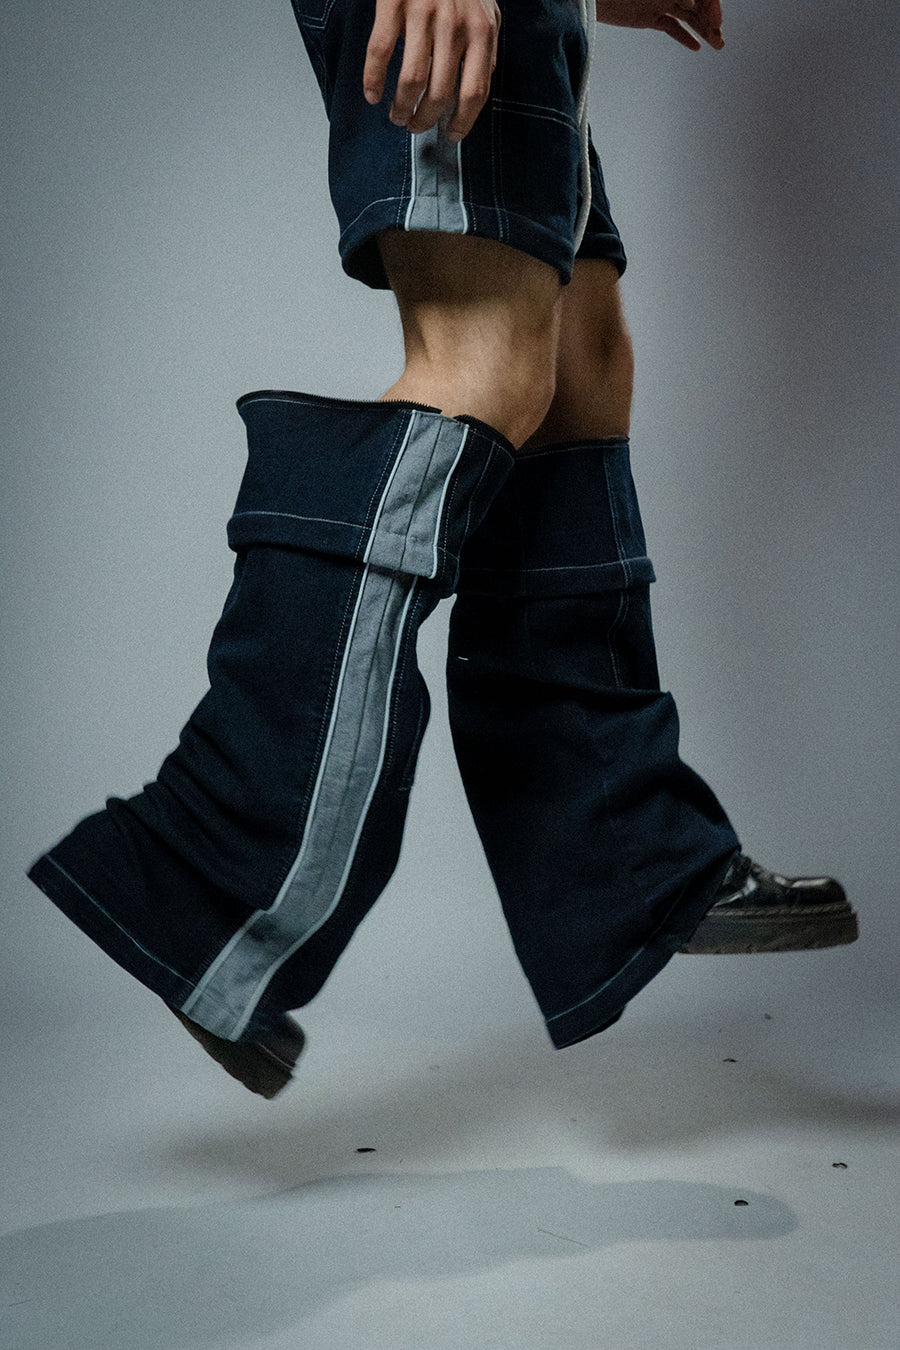 This 3 Way Detachable Jeans, crafted from premium denim and featuring detachable elements, these jeans offer endless styling possibilities, available at Cop Underdog In-store and ready to ship.